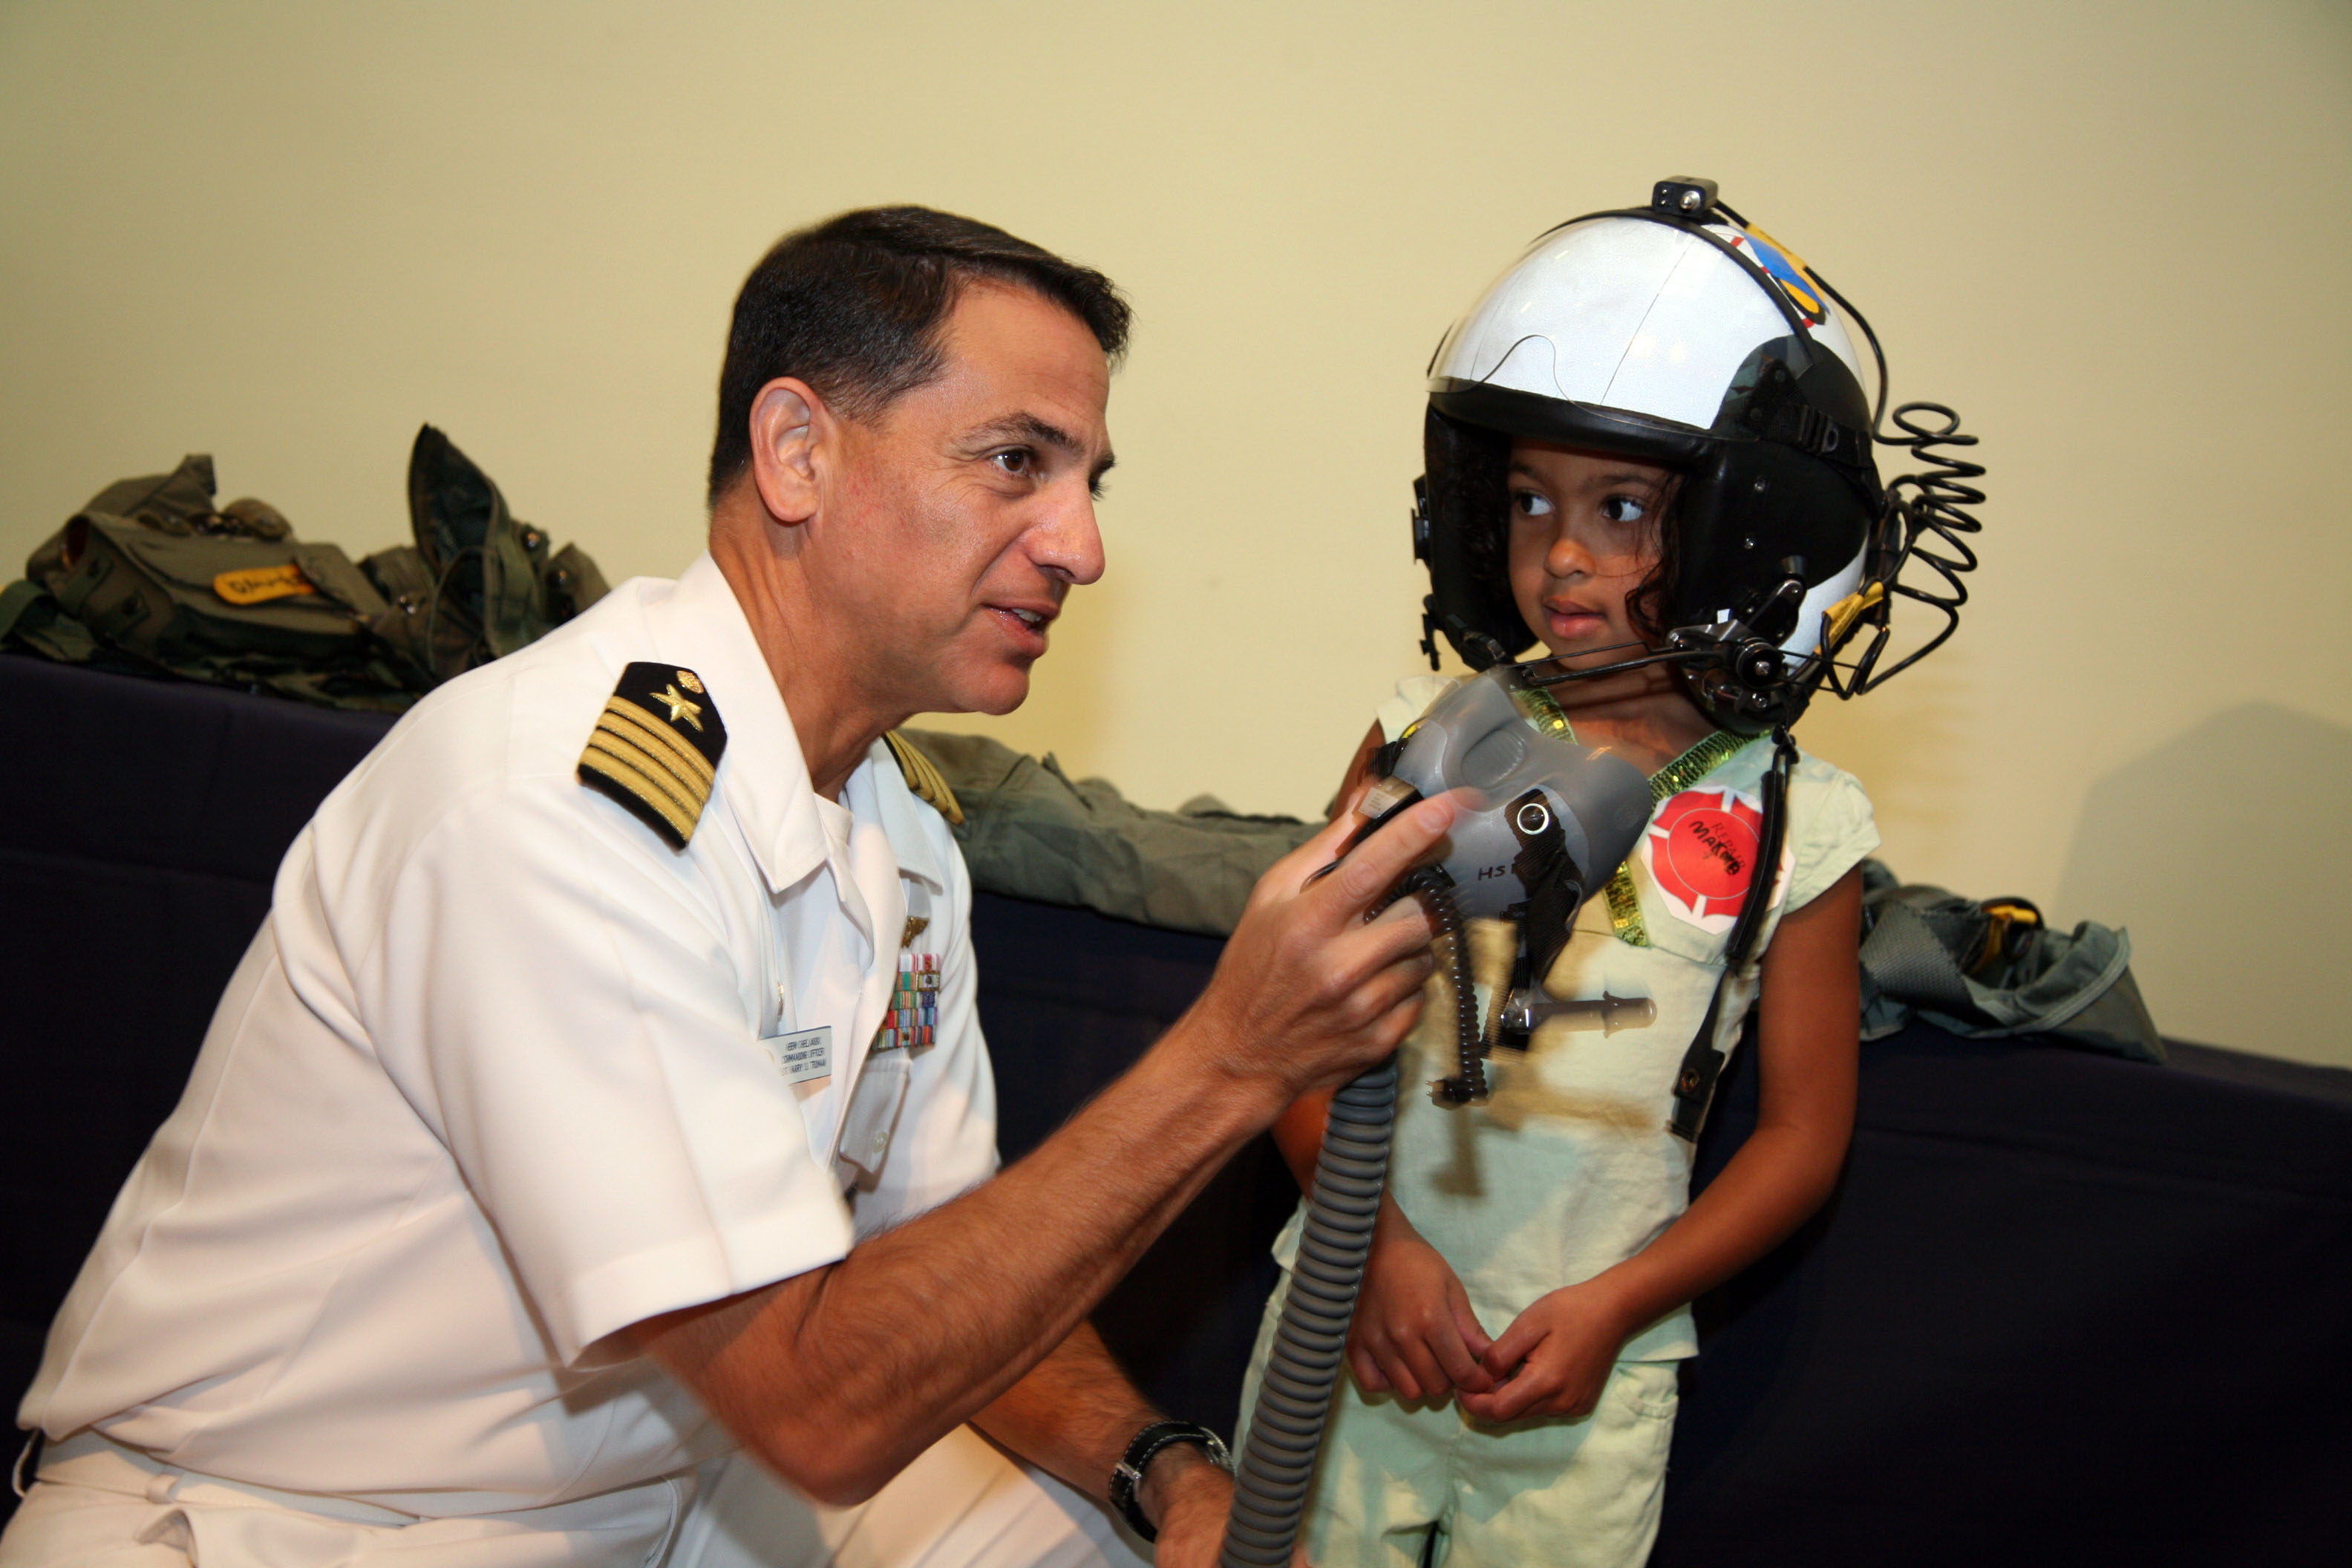 US Navy 070829-N-3271W-002 Capt. Herman Shelanski, commanding officer of USS Harry S. Truman, suits up a young pilot at the St. Louis Science Center